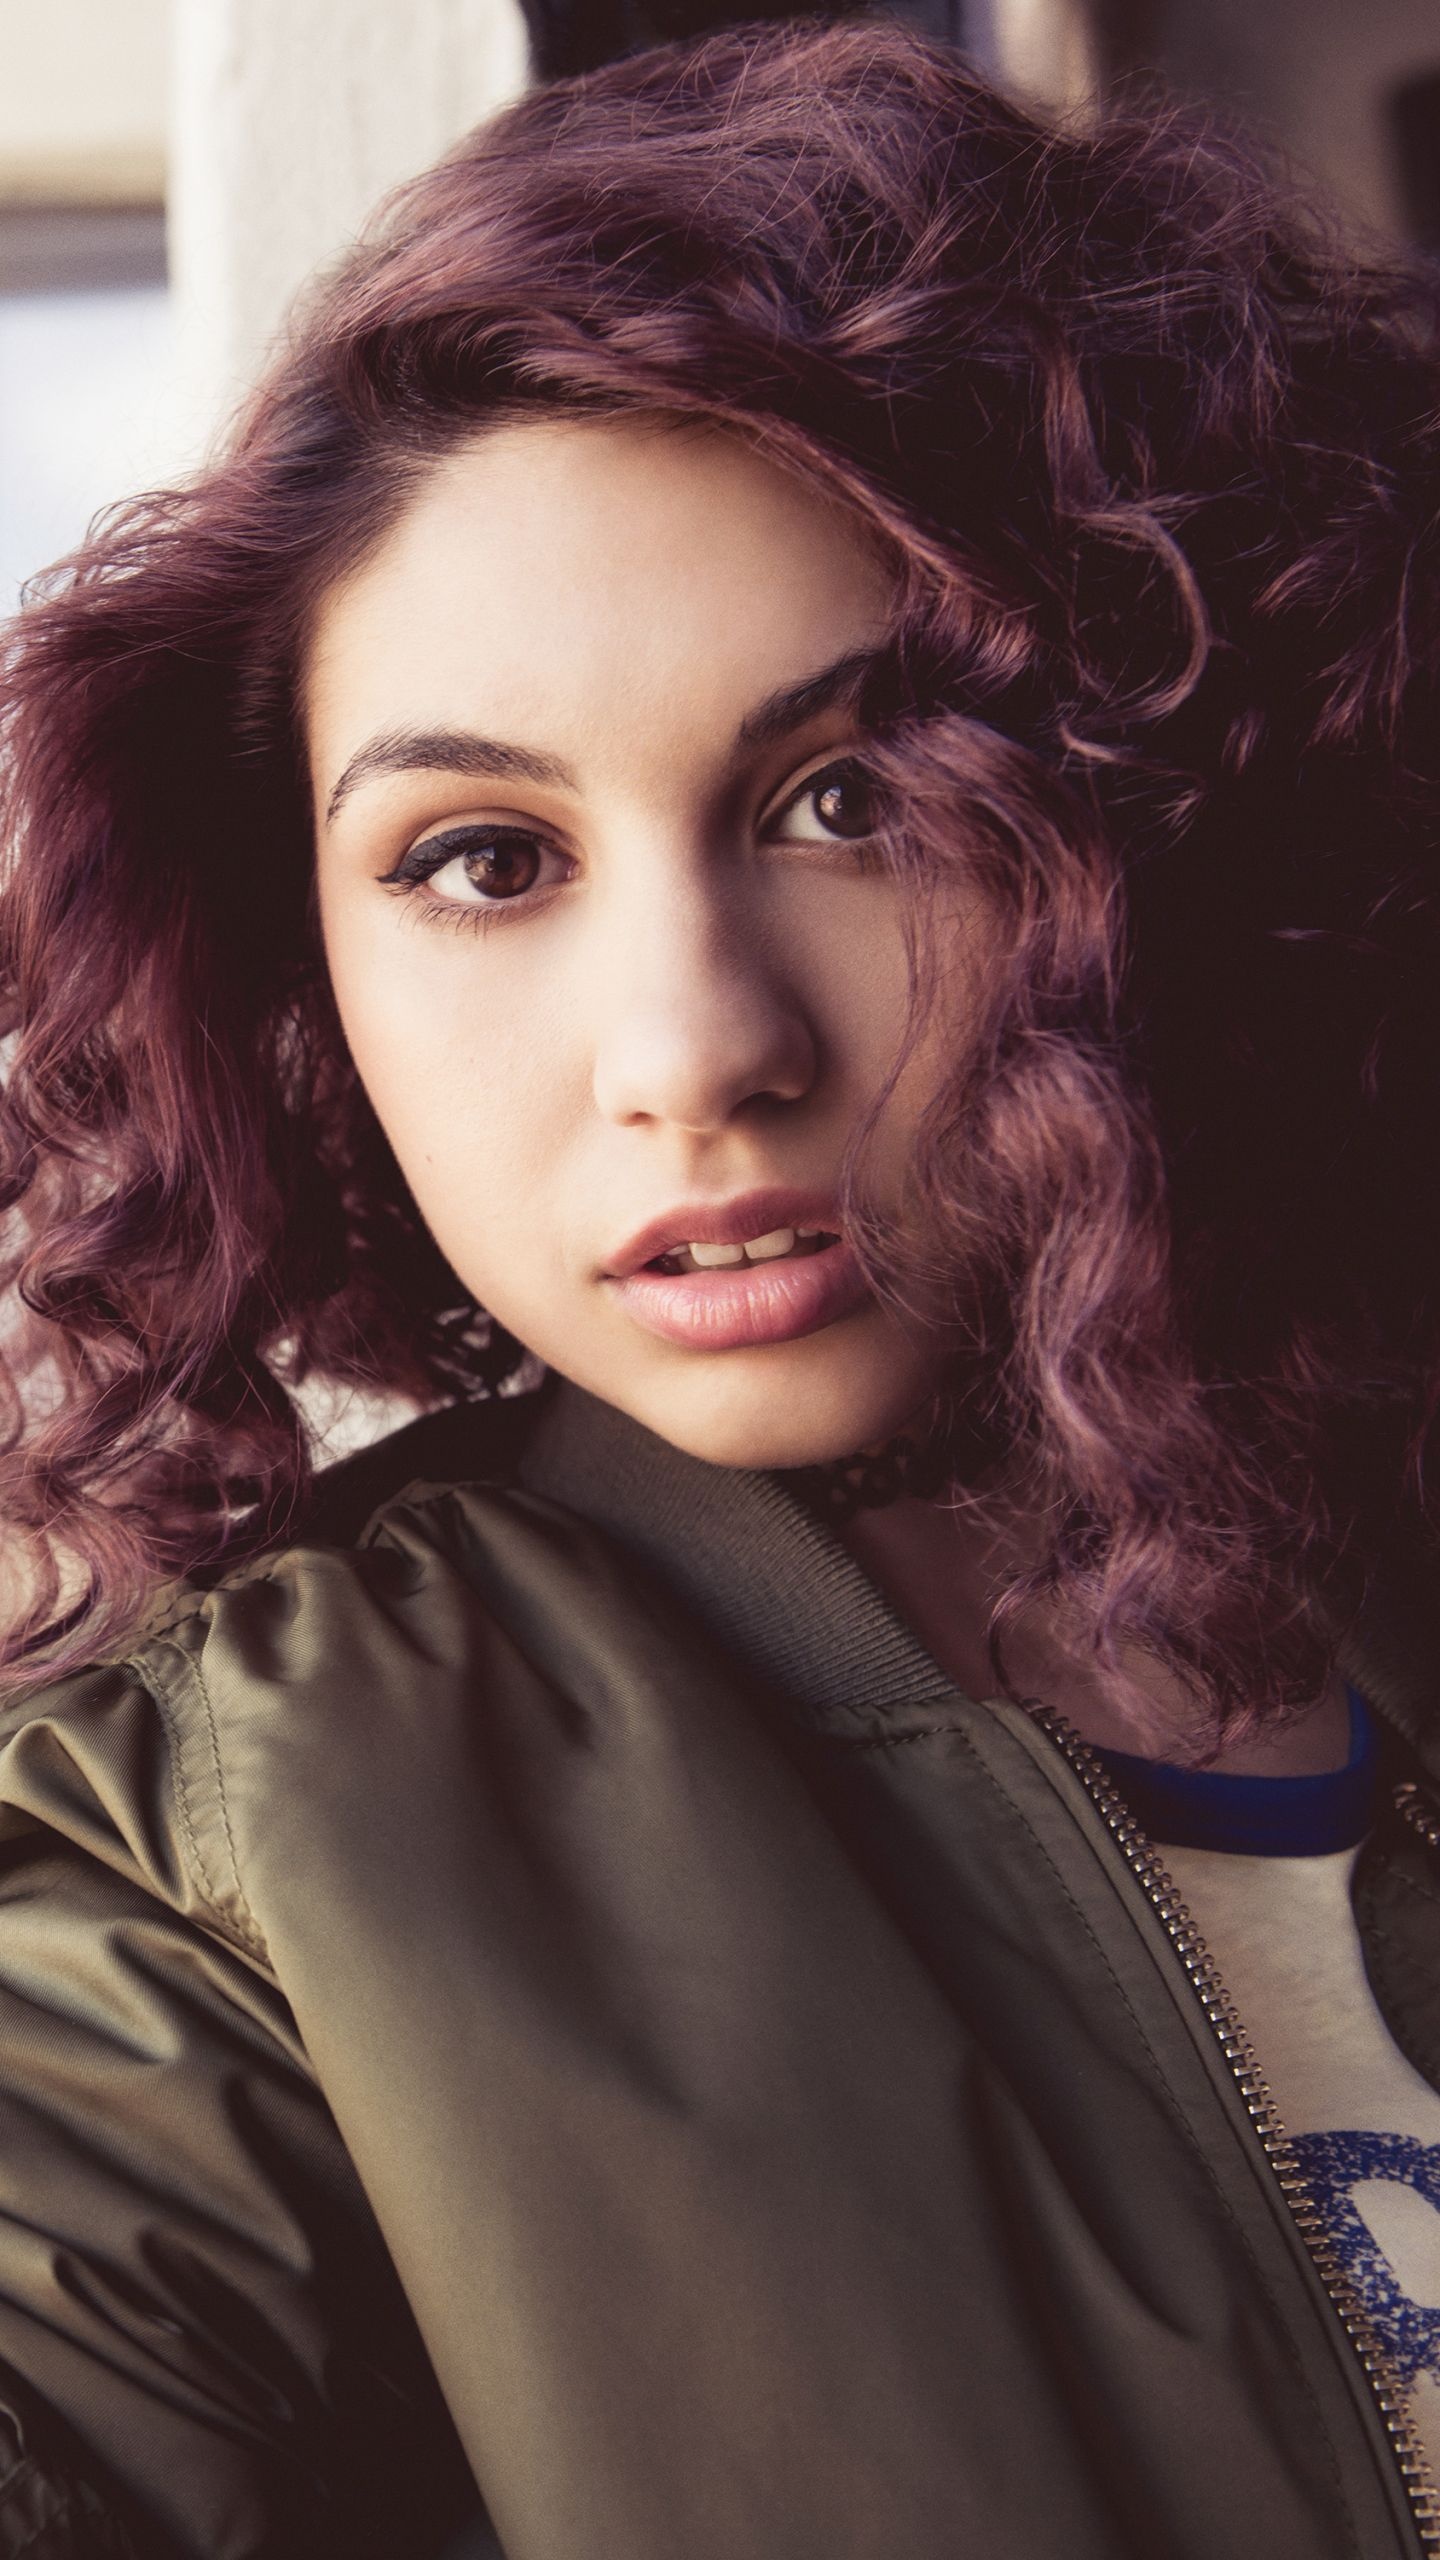 Alessia Cara Wallpapers - Top Free Alessia Cara Backgrounds 1440x2560